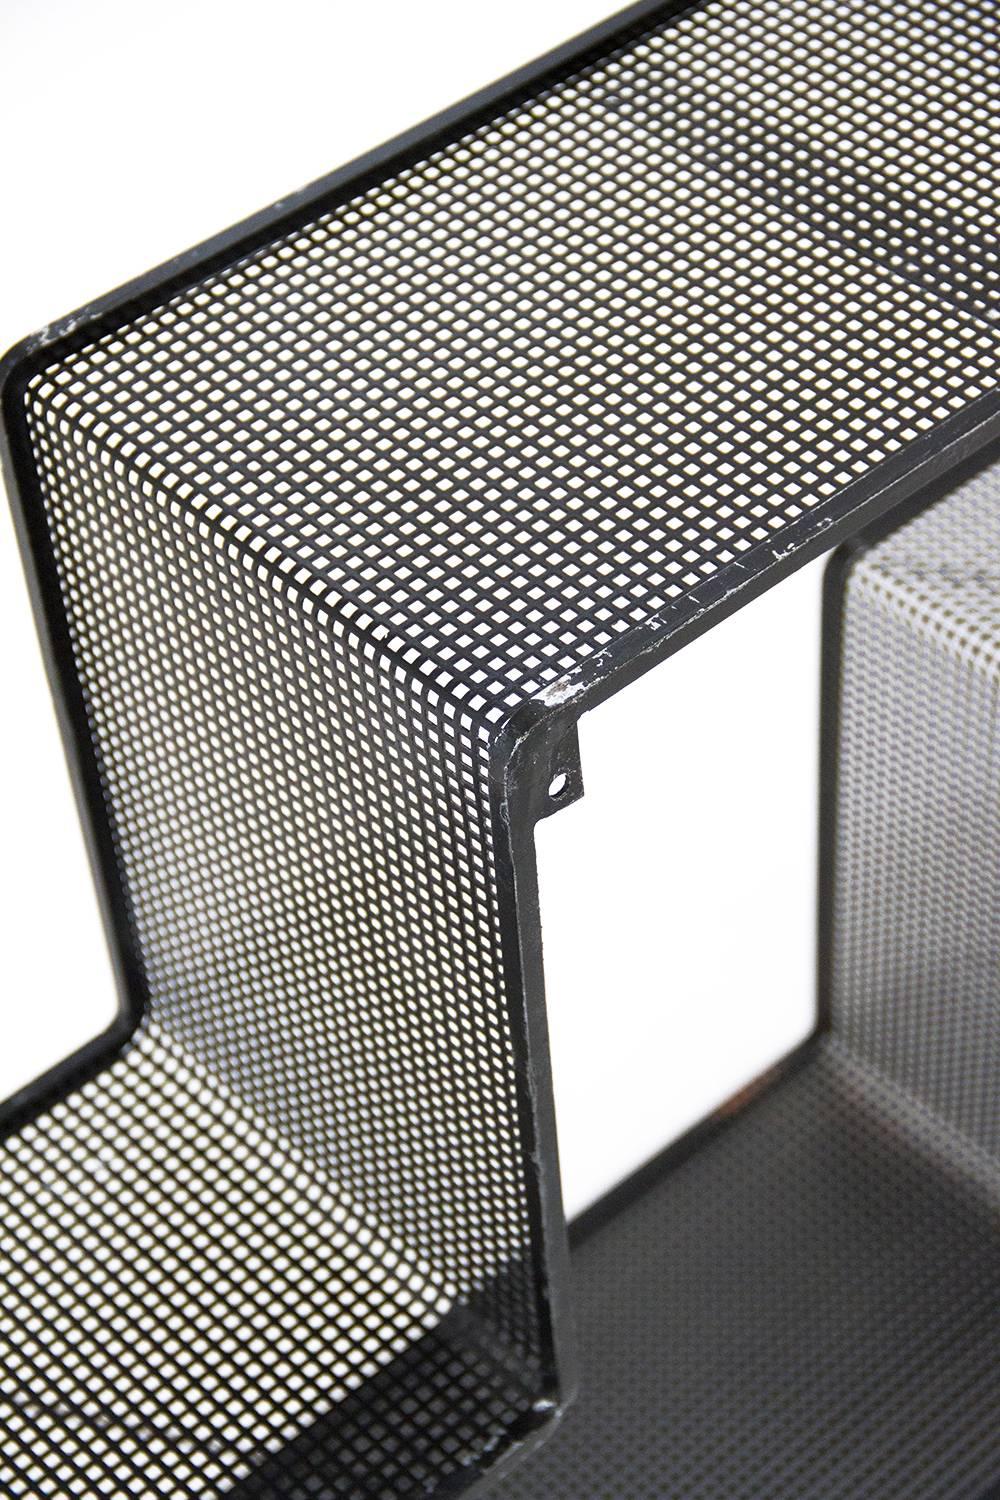 Mid-20th Century Black Dedal Wall Shelf by Mathieu Mategot, Perforated Steel, circa 1950, France For Sale